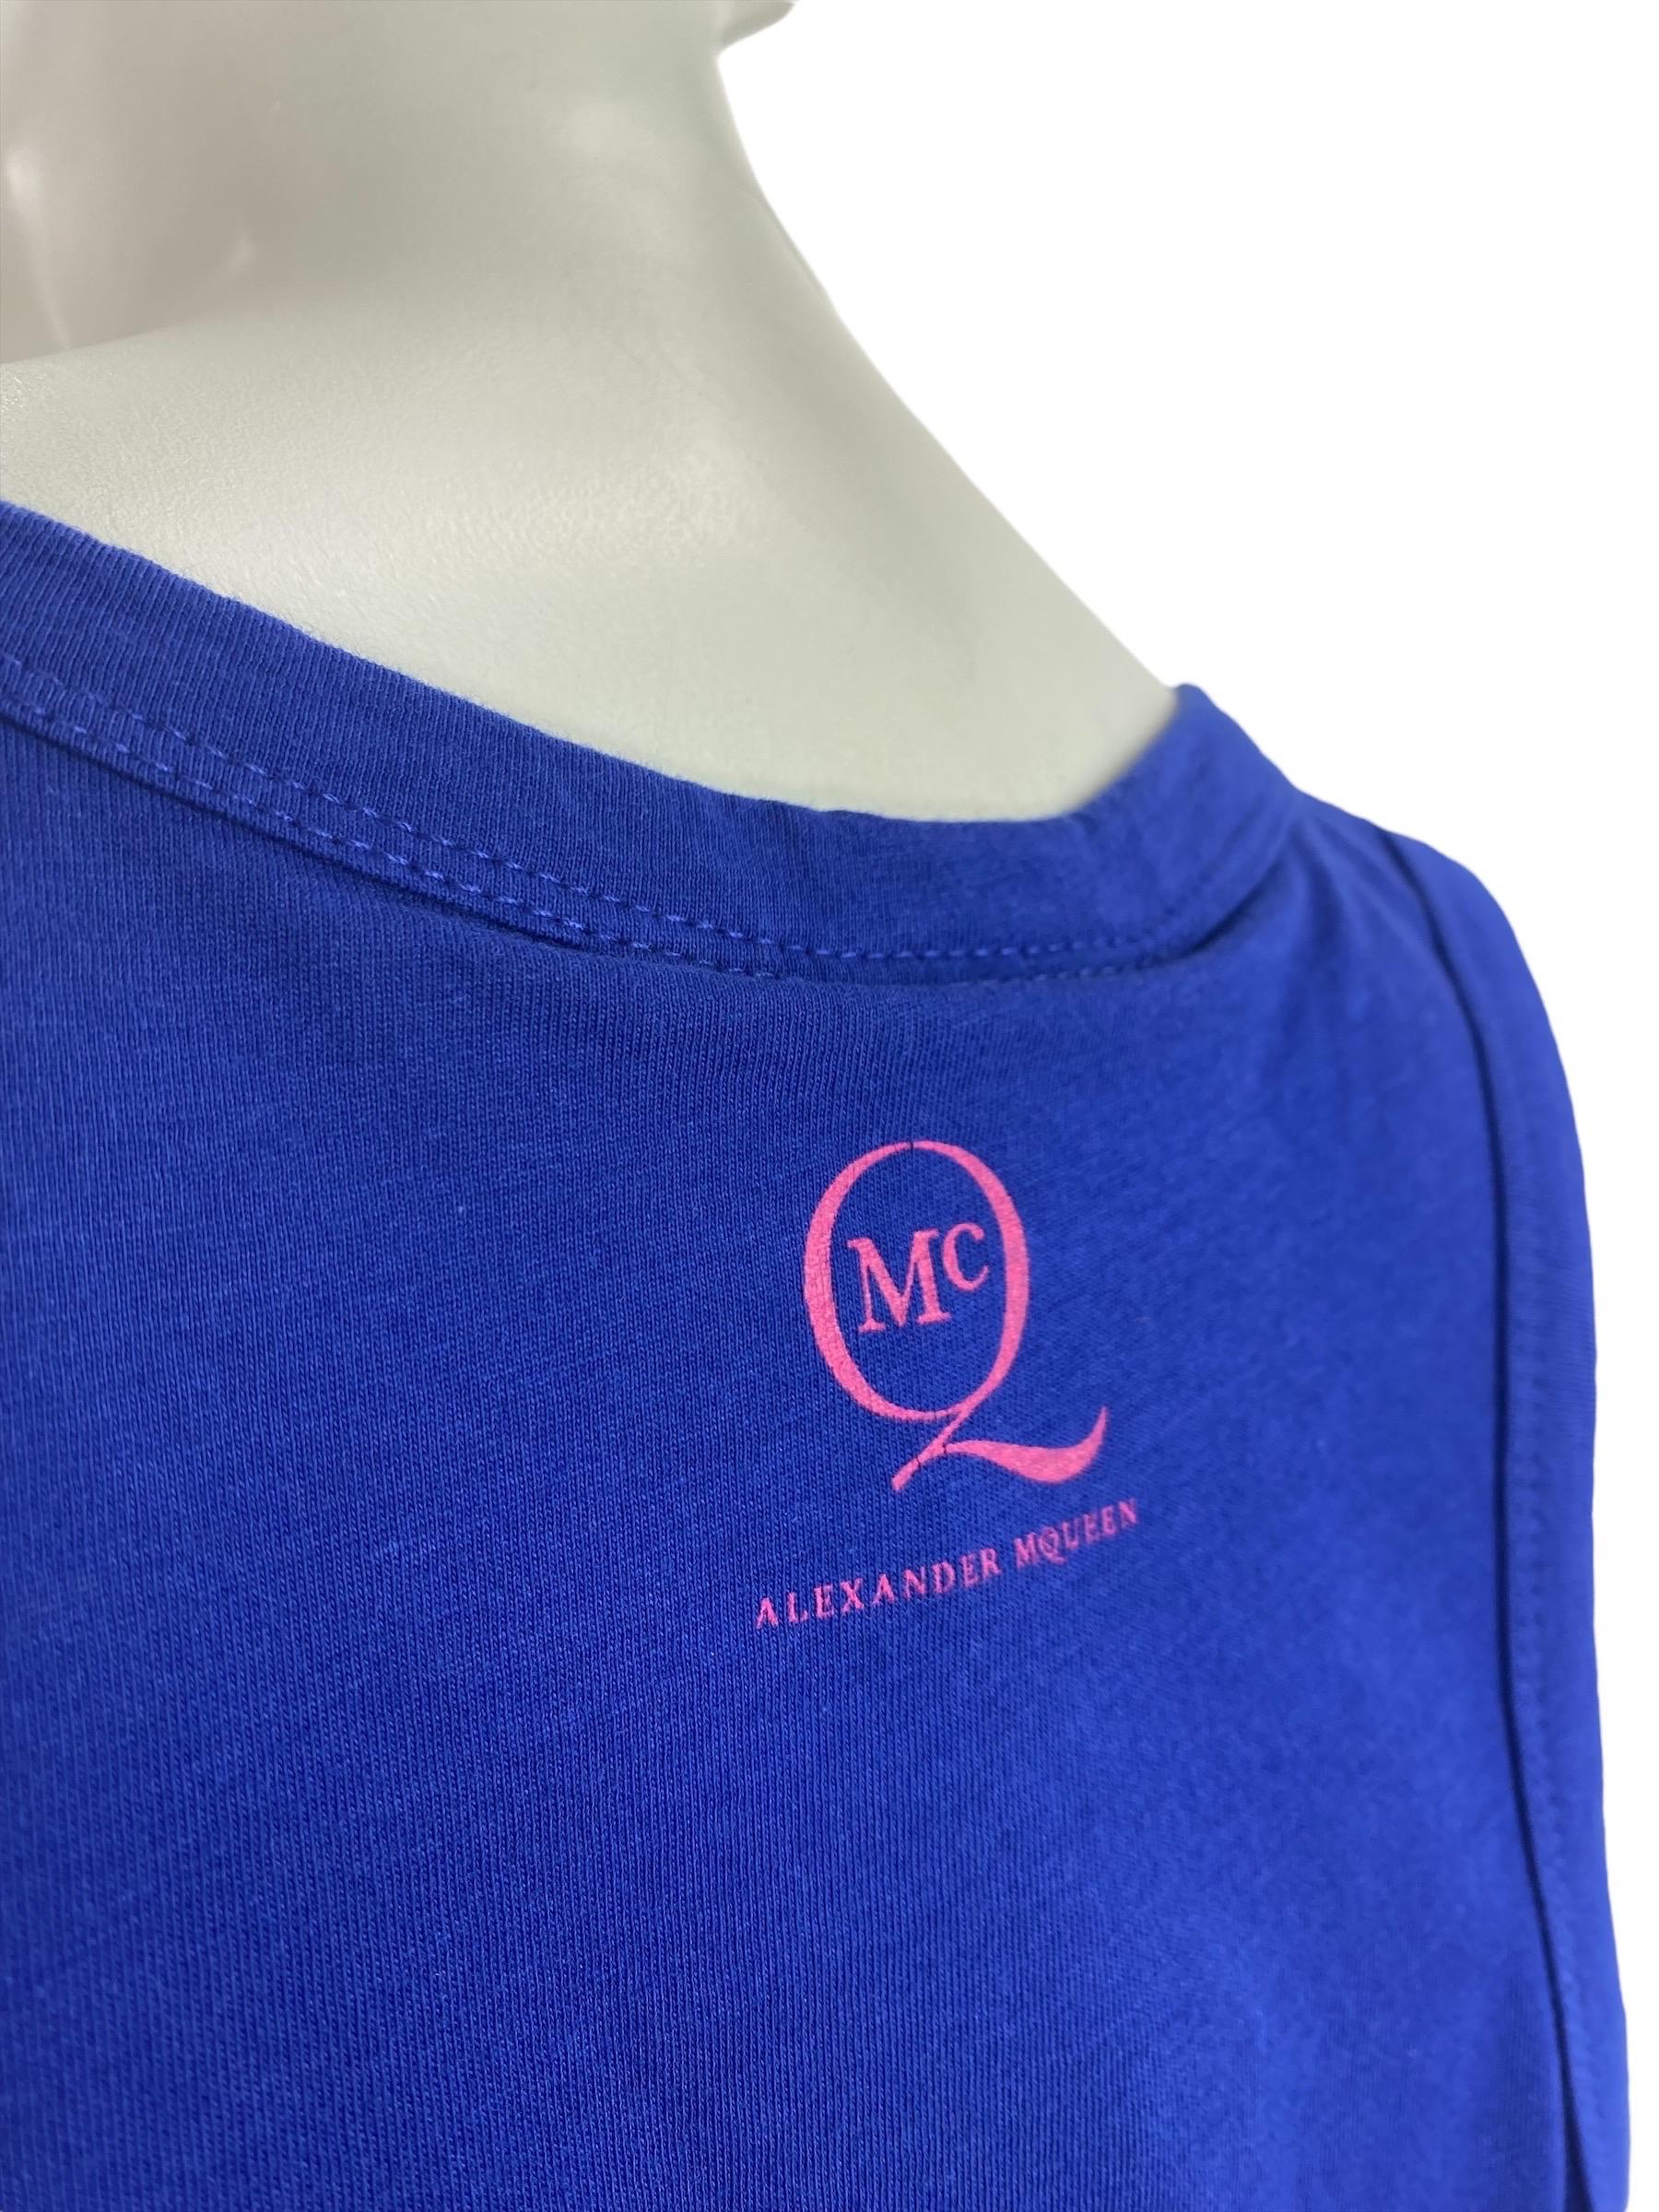 Blue Iconic Vintage Alexander McQueen McQ Top T-shirt For Sale